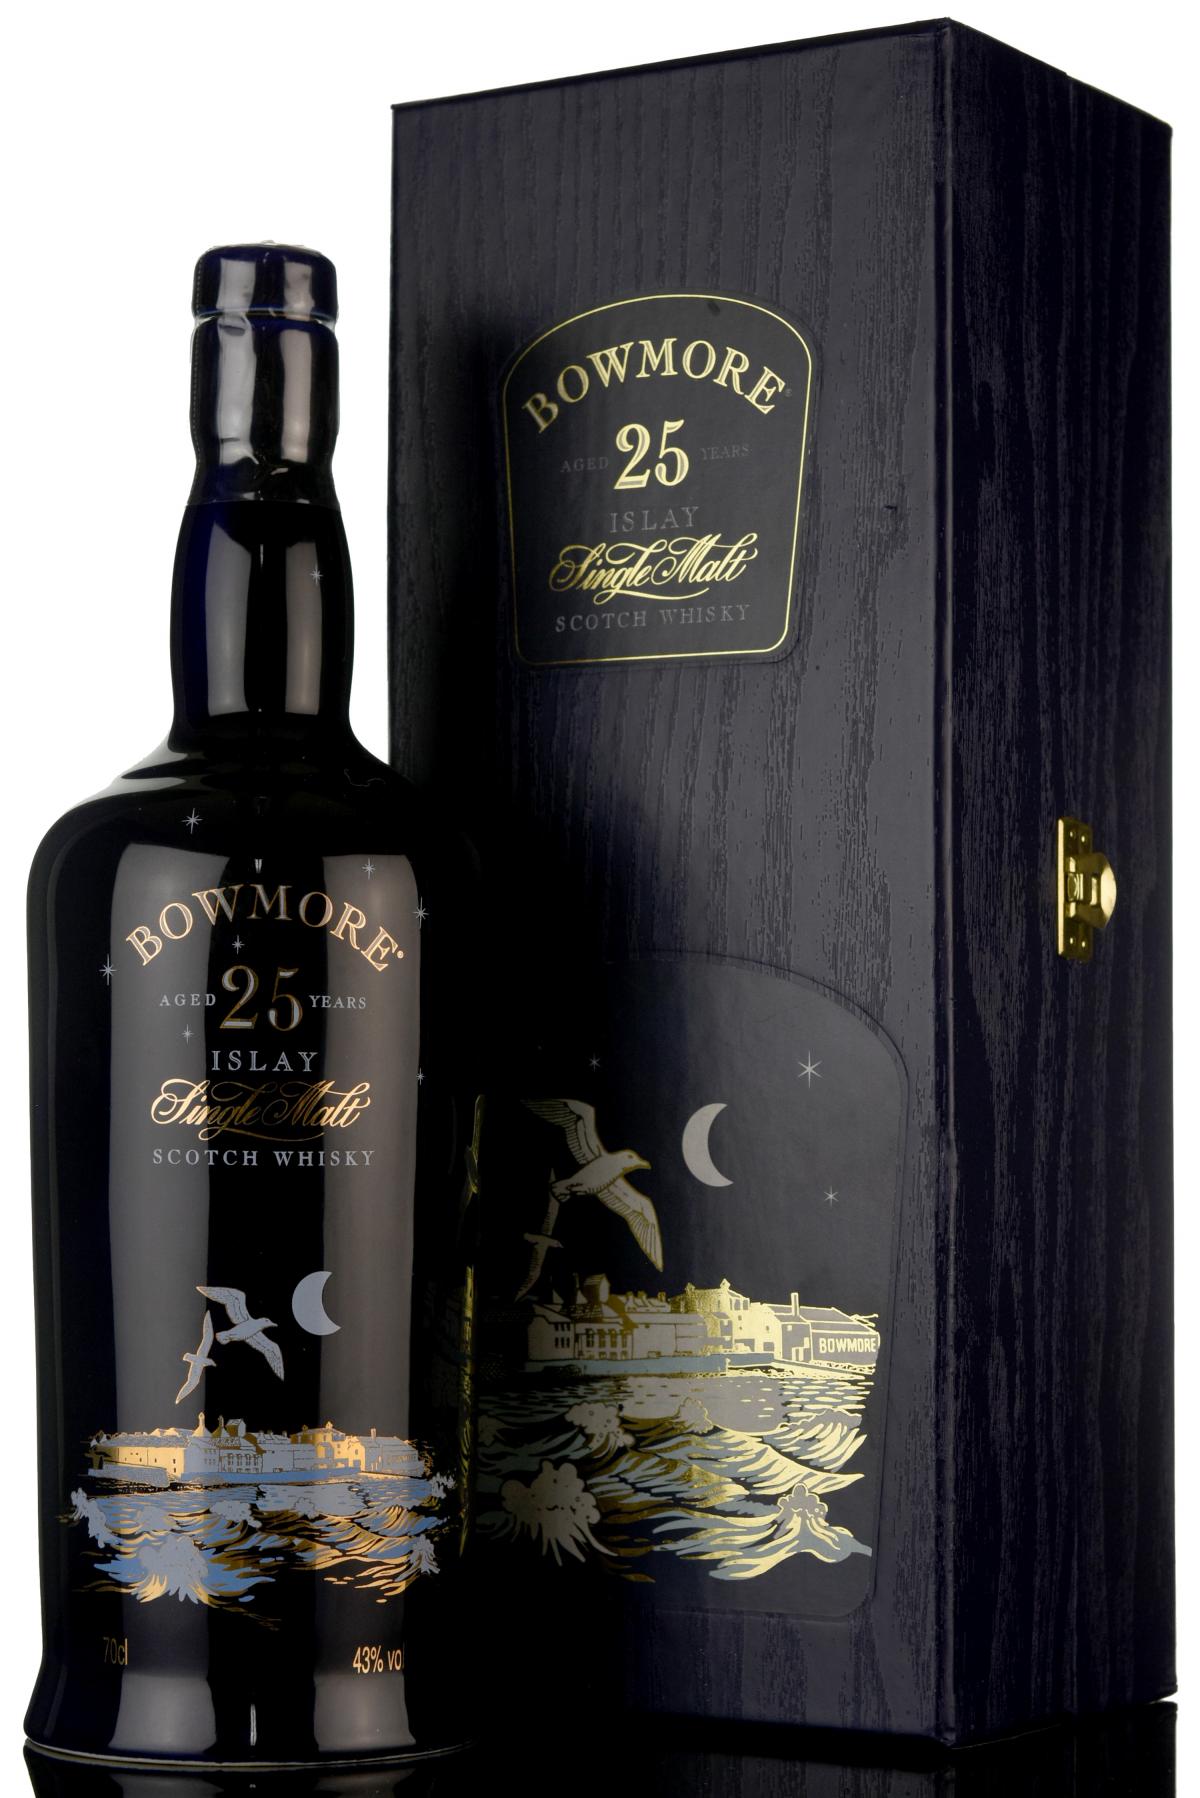 Bowmore 25 Year Old - Seagulls